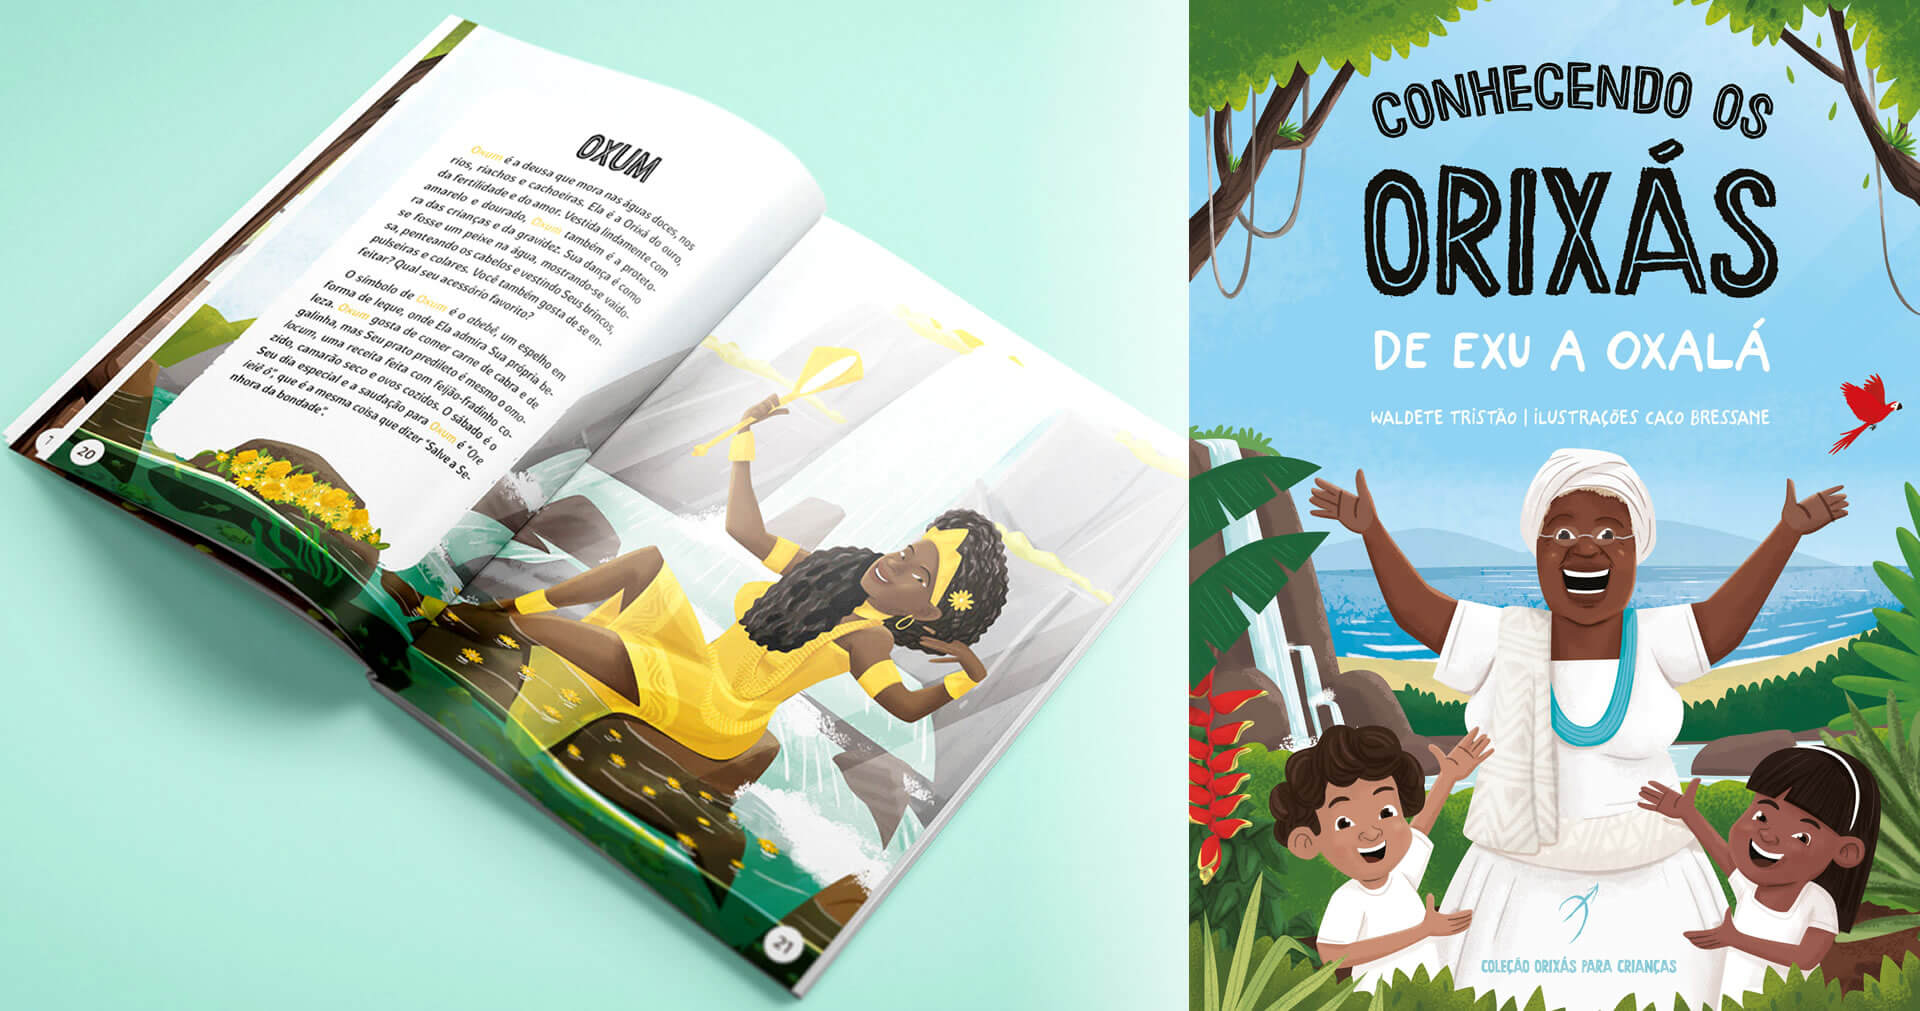 Diego de Oxóssi | Written by Waldete Tristão, Knowing the Orixás is a glorious book intended to educate young people about the beauty of African spirituality.